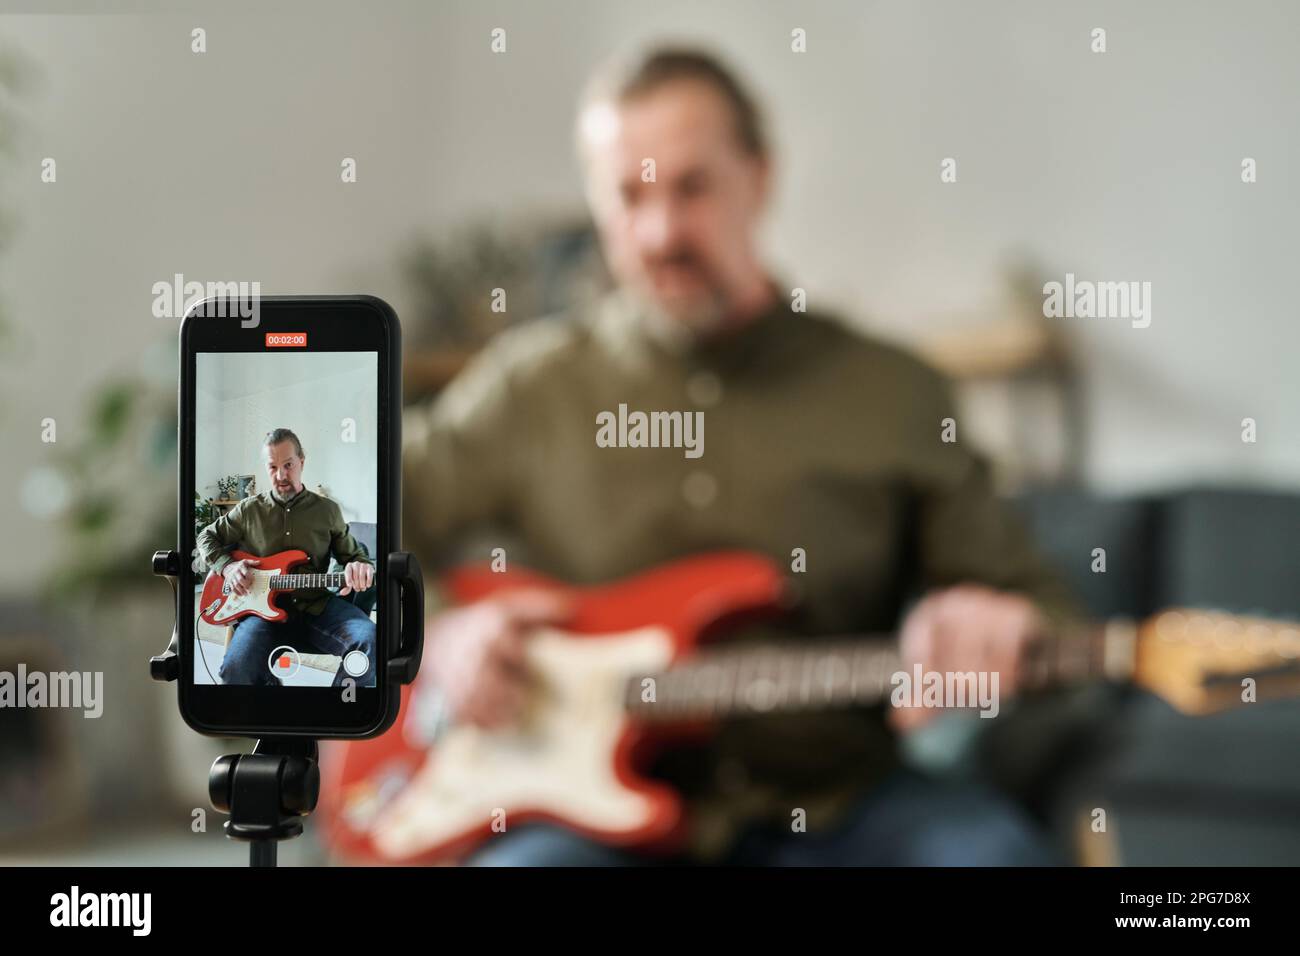 Selective focus of screen of smartphone with guitarist recording online lessons on it at home Stock Photo